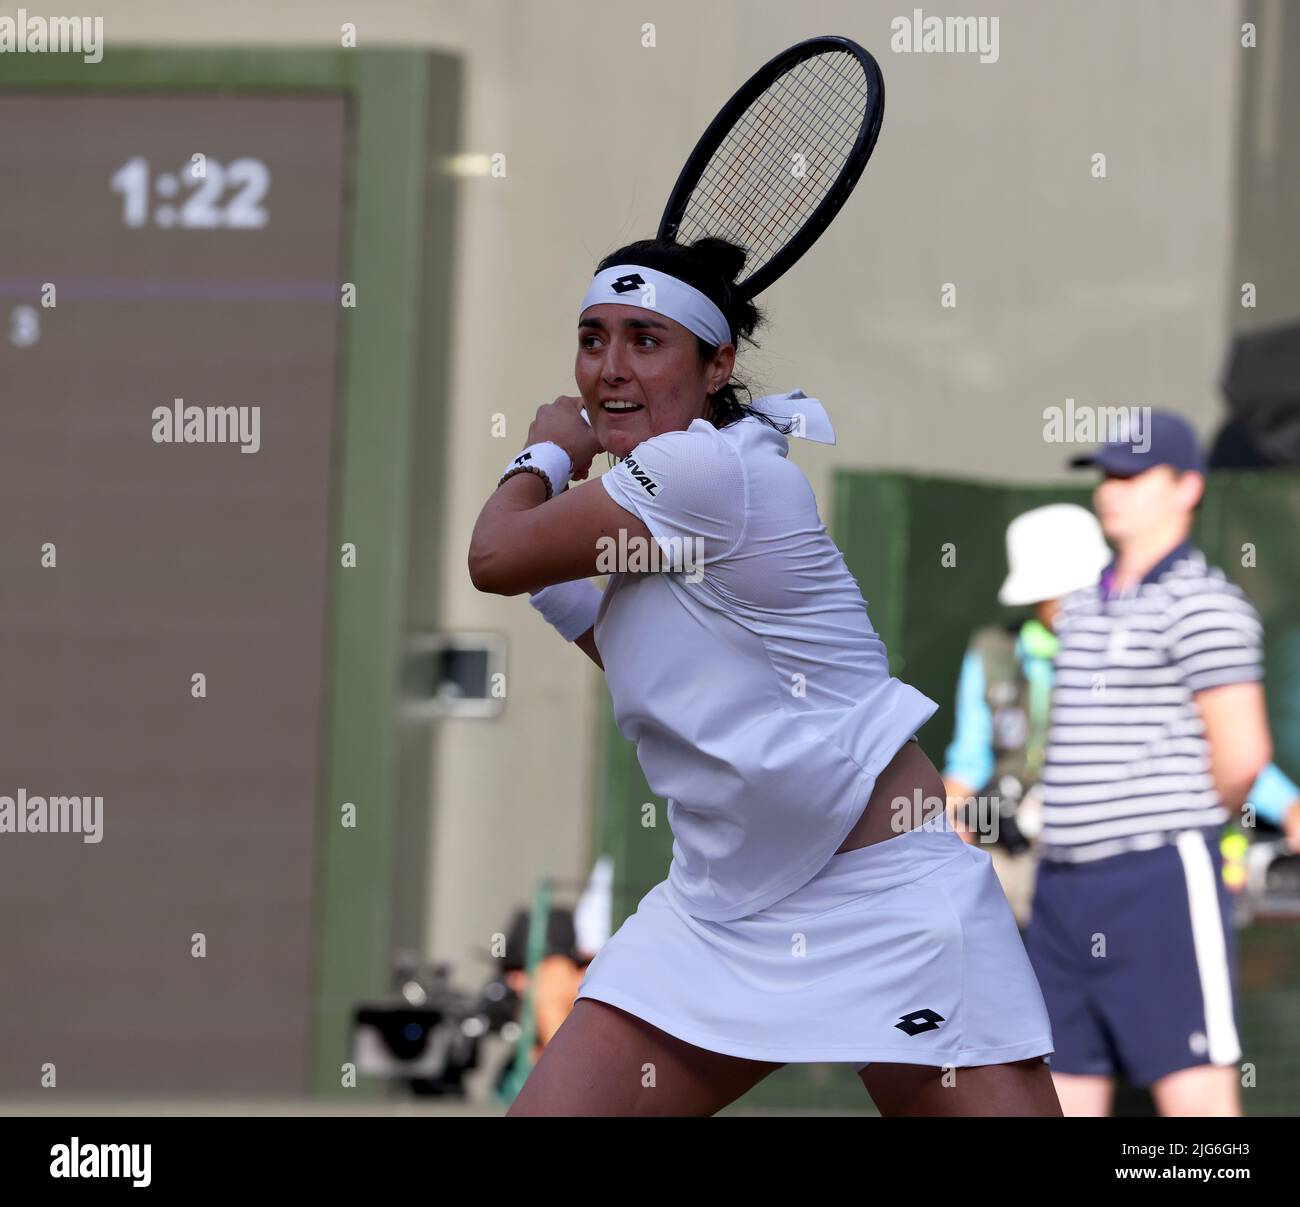 5 July 2022, All England Lawn Tennis Club, Wimbledon, London, United Kingdom:  Tunisia's Ons Jabeur during her quarterfinal match against Marie Bouzkova of the Czech Republic at Wimbledon today.  Jabeur won the match to advance to the semi finals. Stock Photo